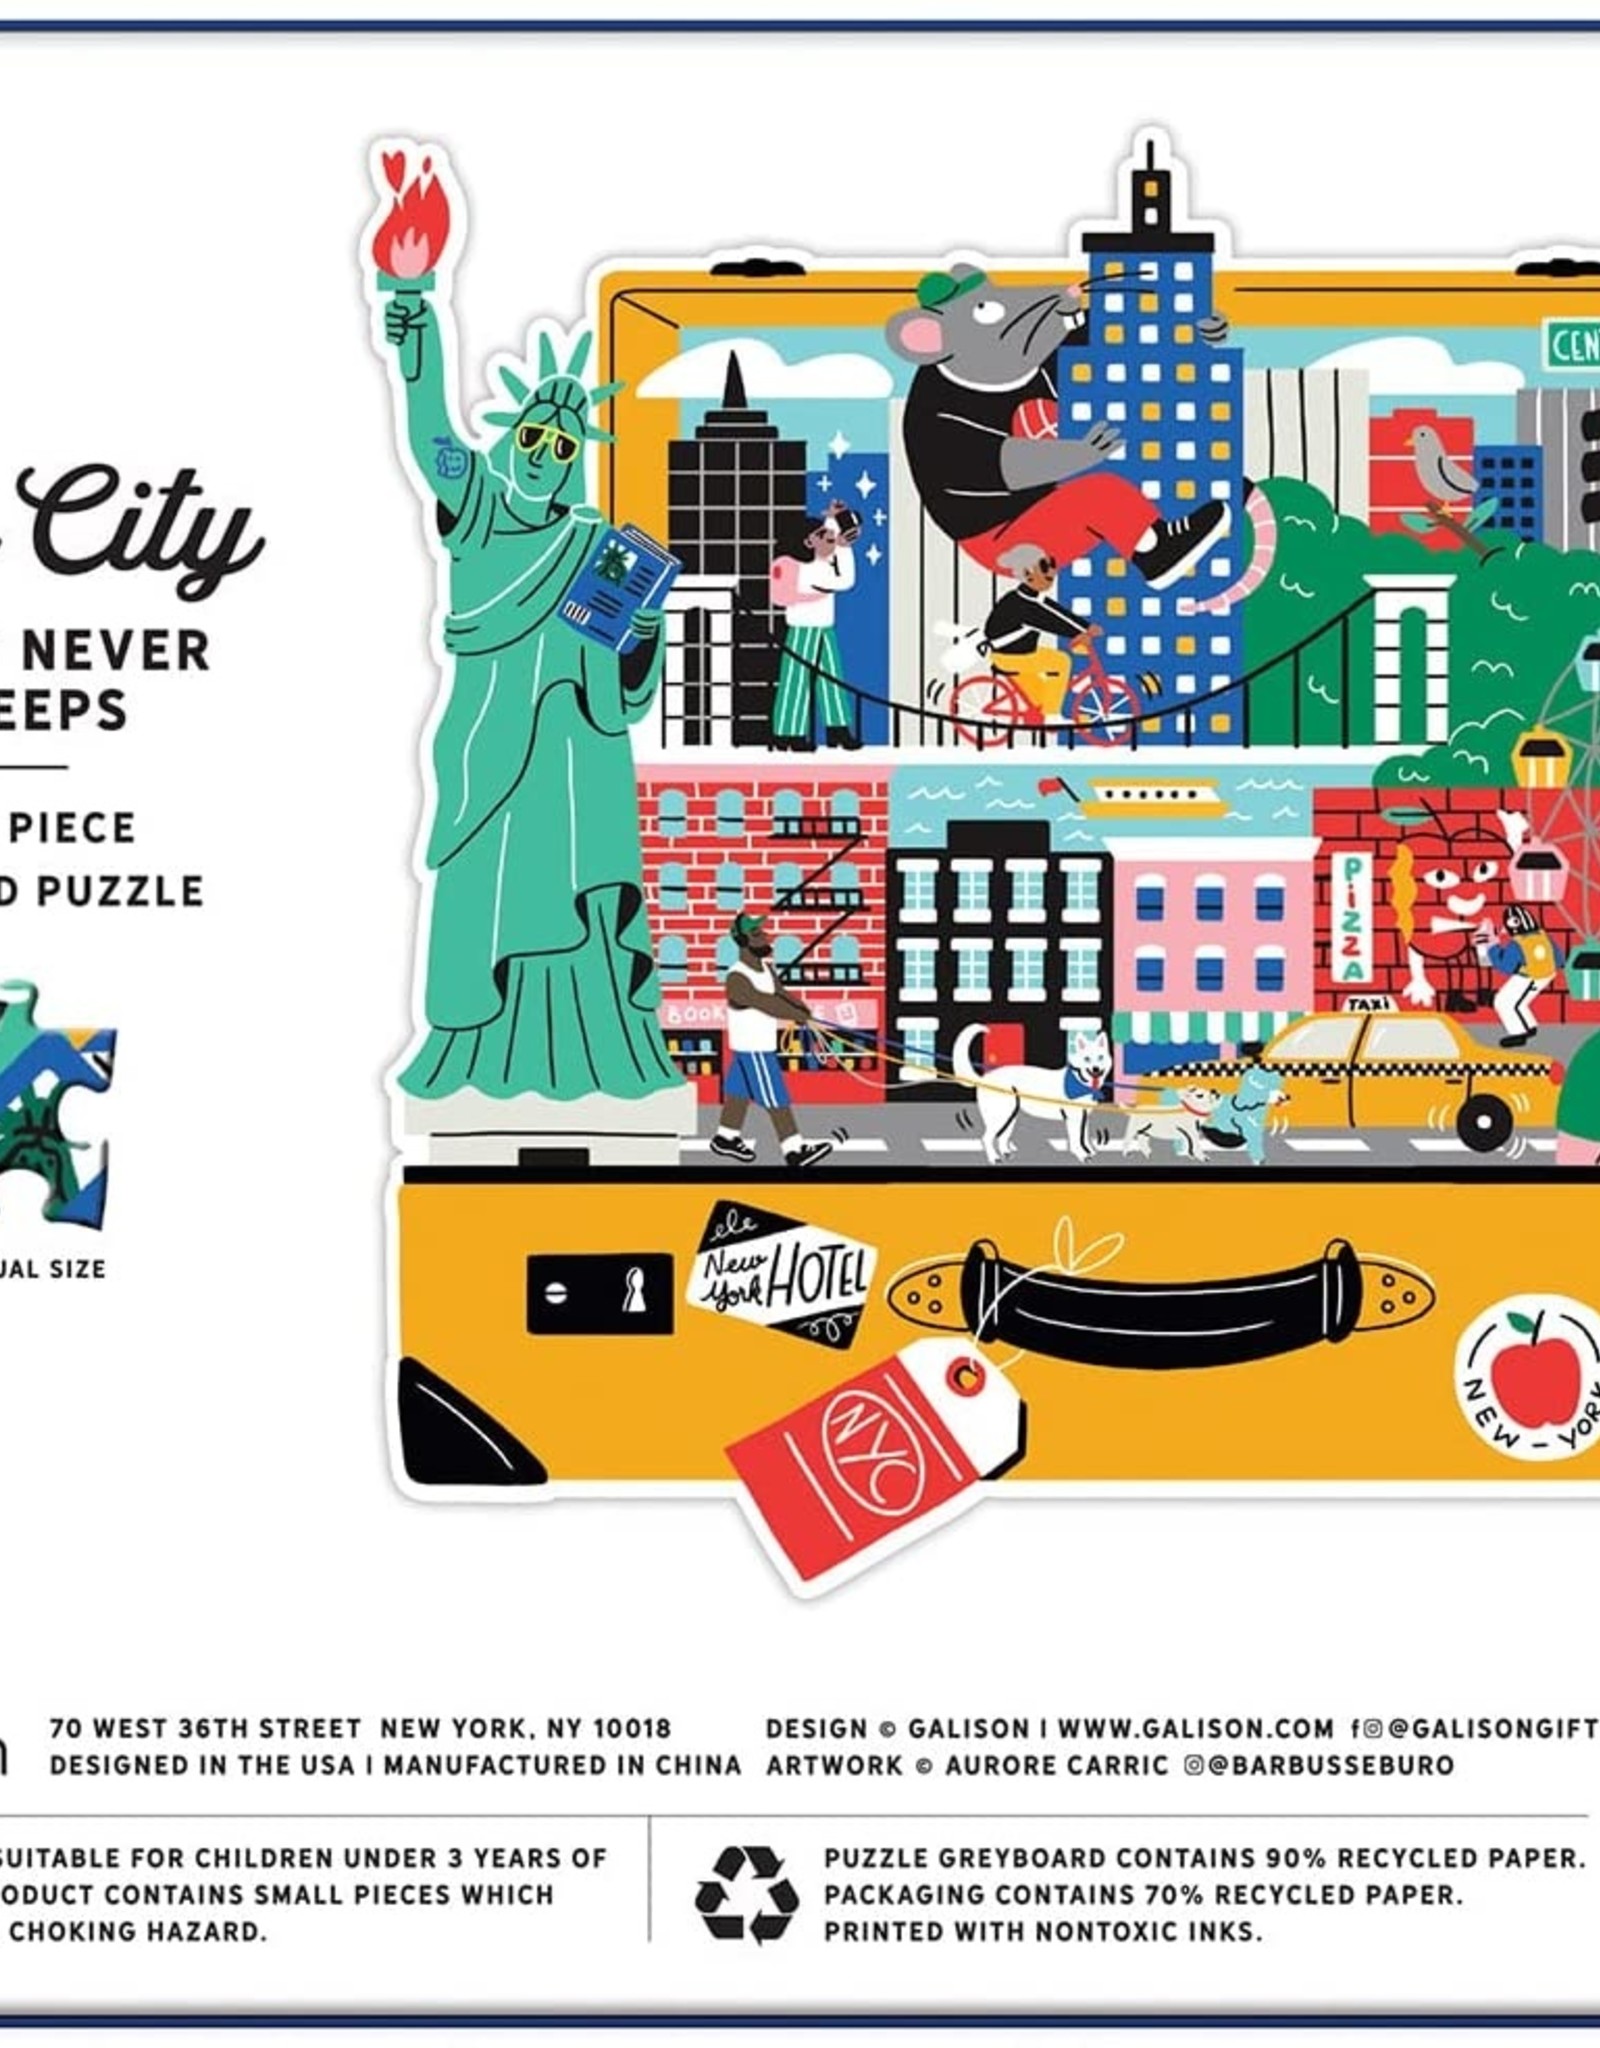 Chronicle Books Puzzle - 750 Piece: NYC Suitcase